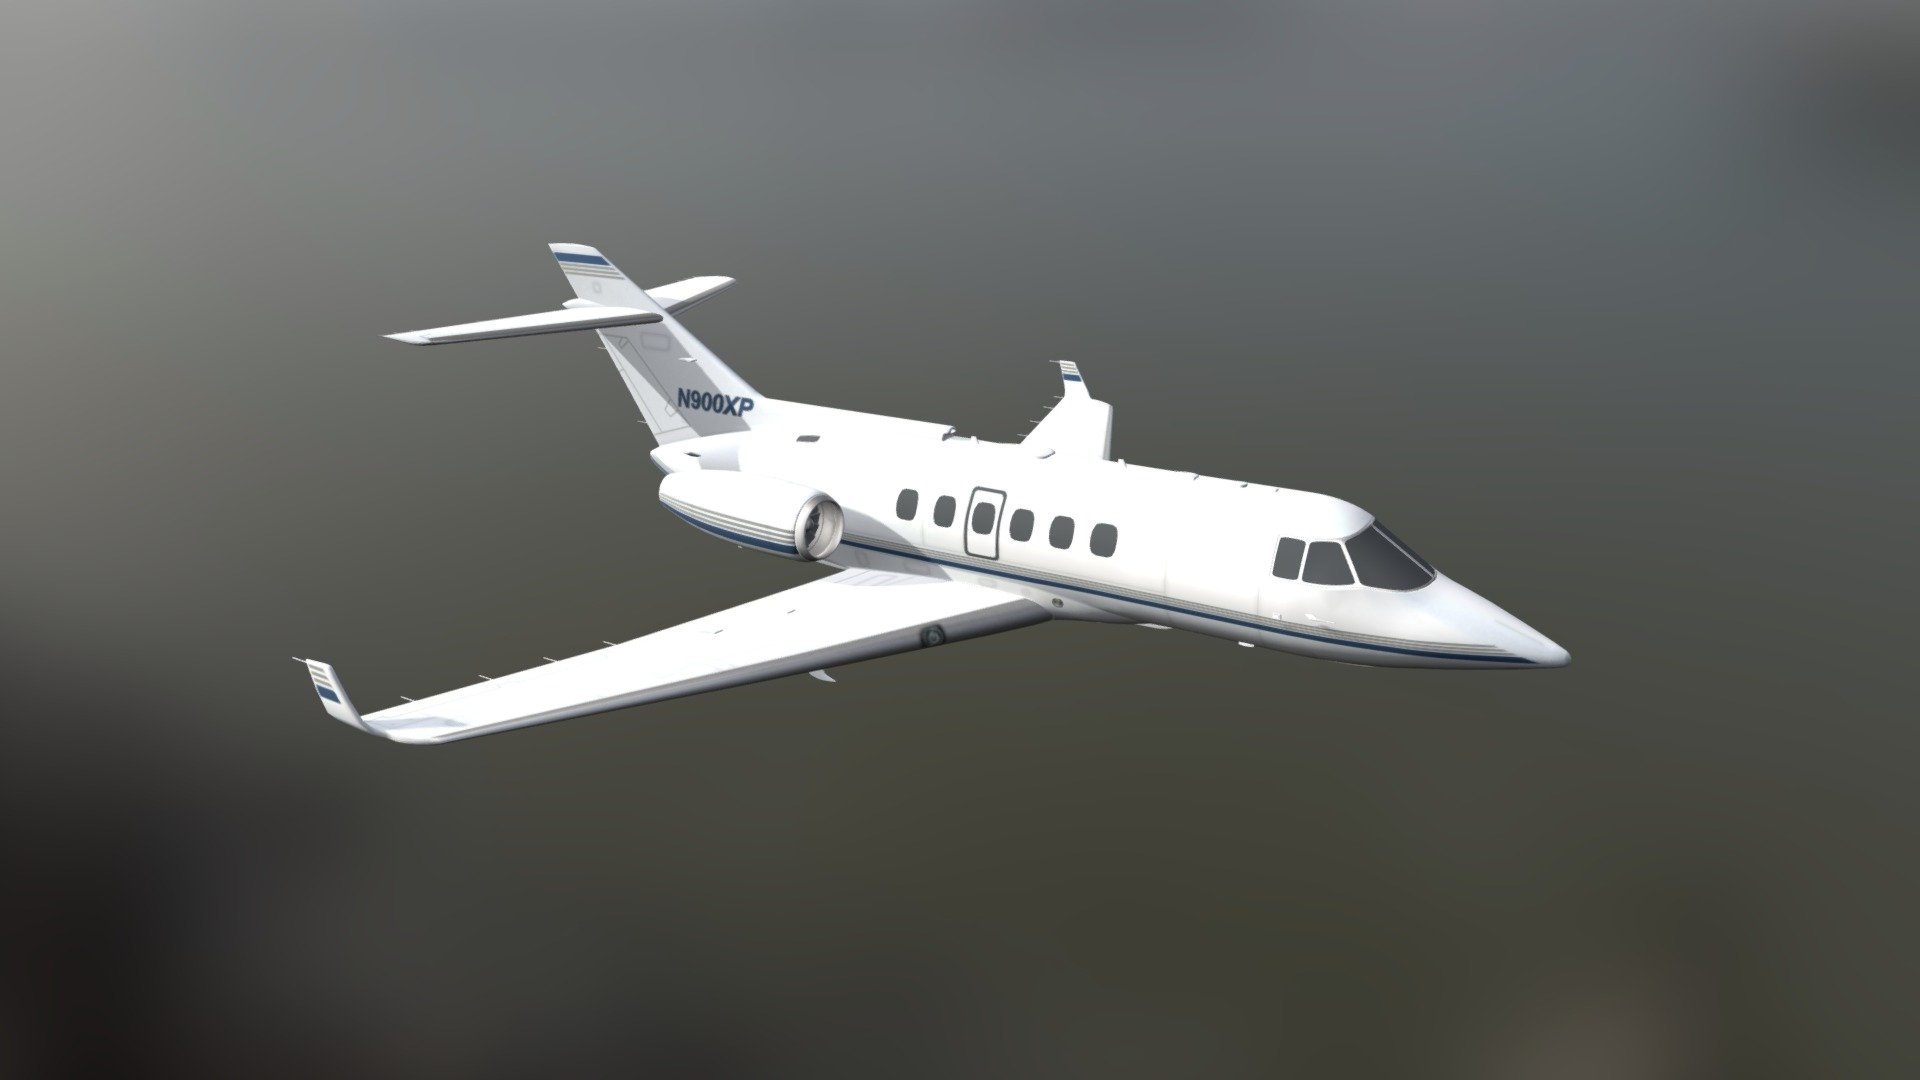 Hawker N900XP Airoplane 3D Model

These models are excellent for pulling into CAD, Game Engines or animation softwares; whatever your flavour these have you covered - polygon-centric and cross-compatible across all CAD and Modelling softwares

For bespoke modelling and scanning services go to; www.digitalbimsolutions.com - Hawker N900XP Airoplane - Buy Royalty Free 3D model by Digital BIM Solutions (@digitalbimsolutions) 3d model